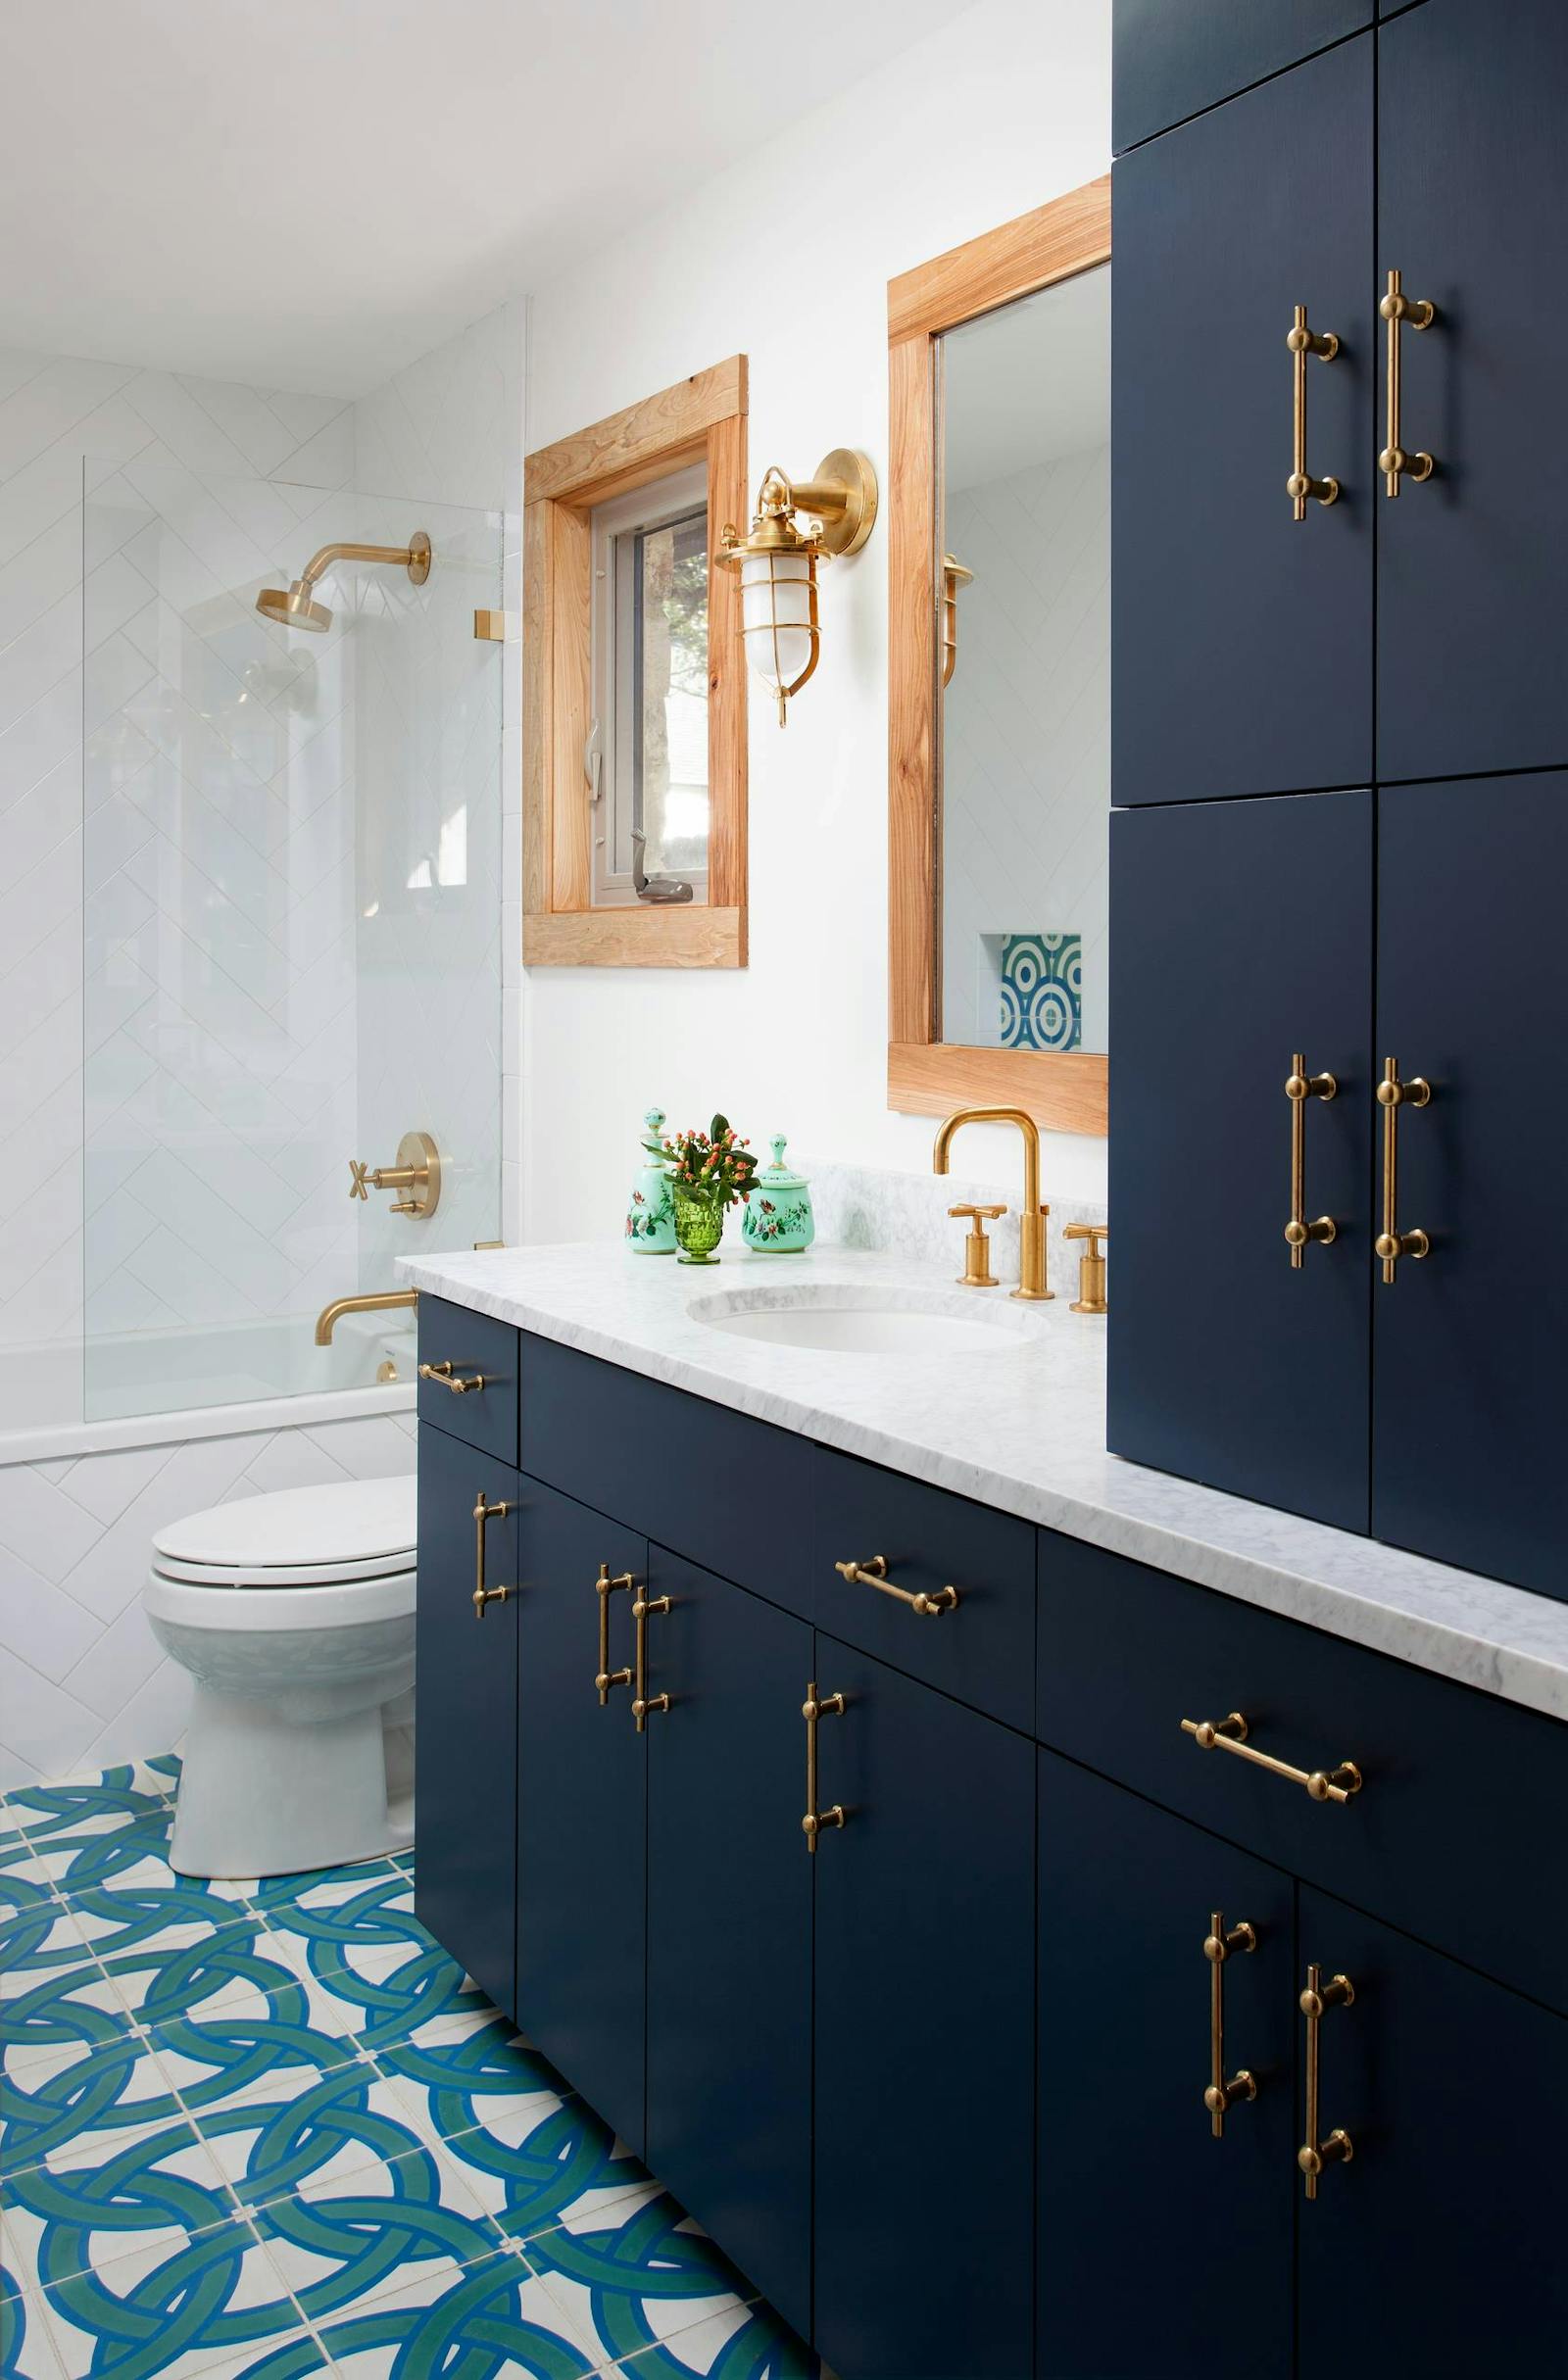 The 5 Bathroom Colour Trends Of 2020 - Inspiration | Lick